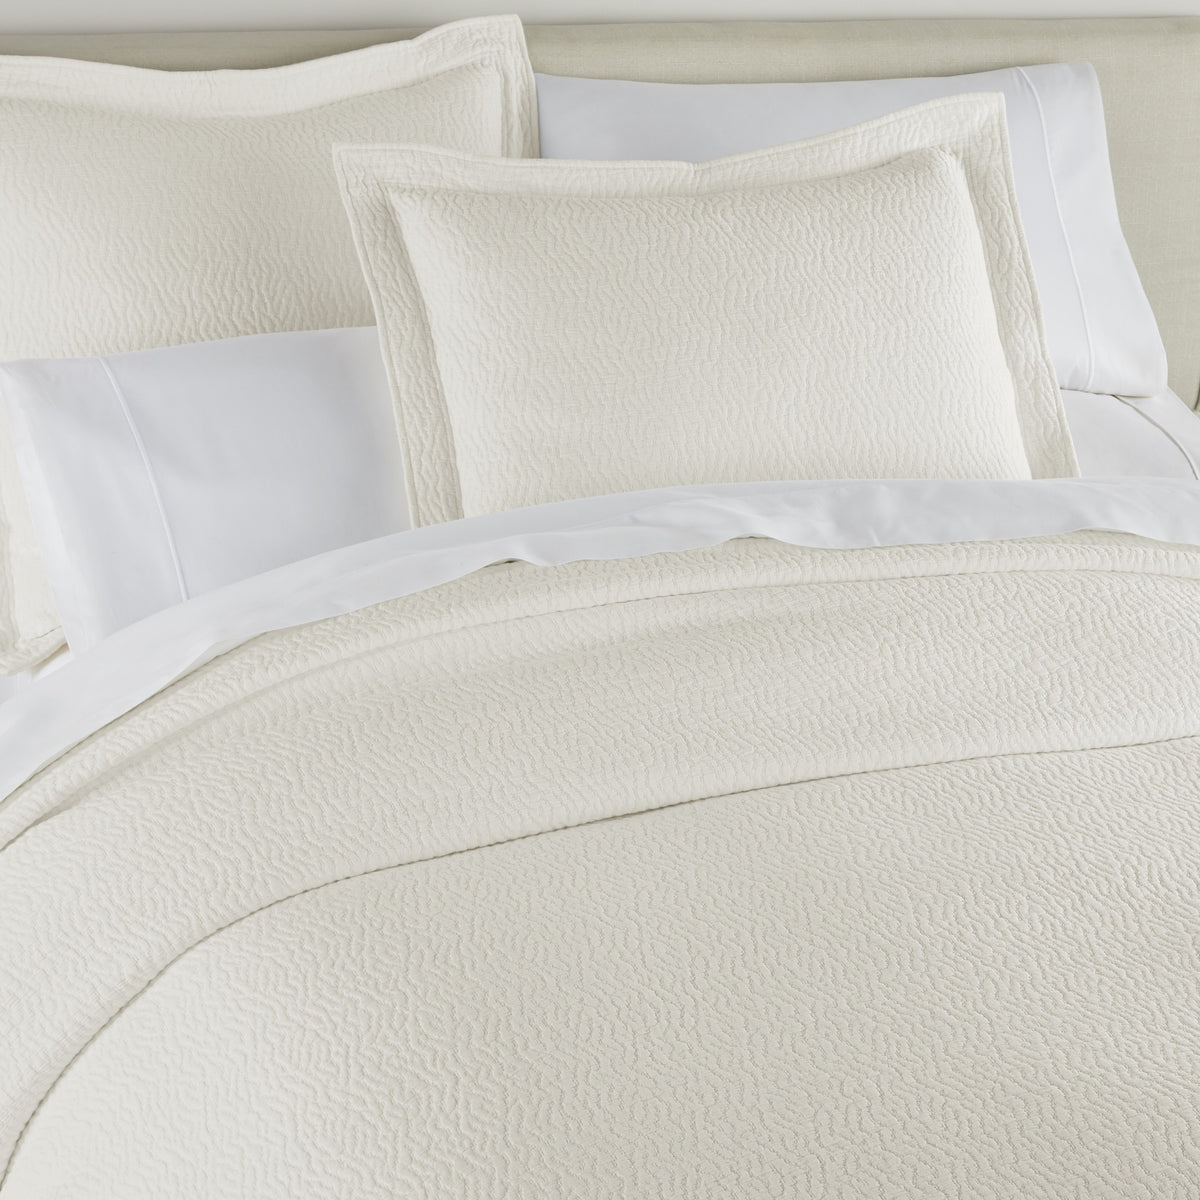 Close Up Image of Peacock Alley Mia Stonewashed Matelassé Bedding in Color Pearl